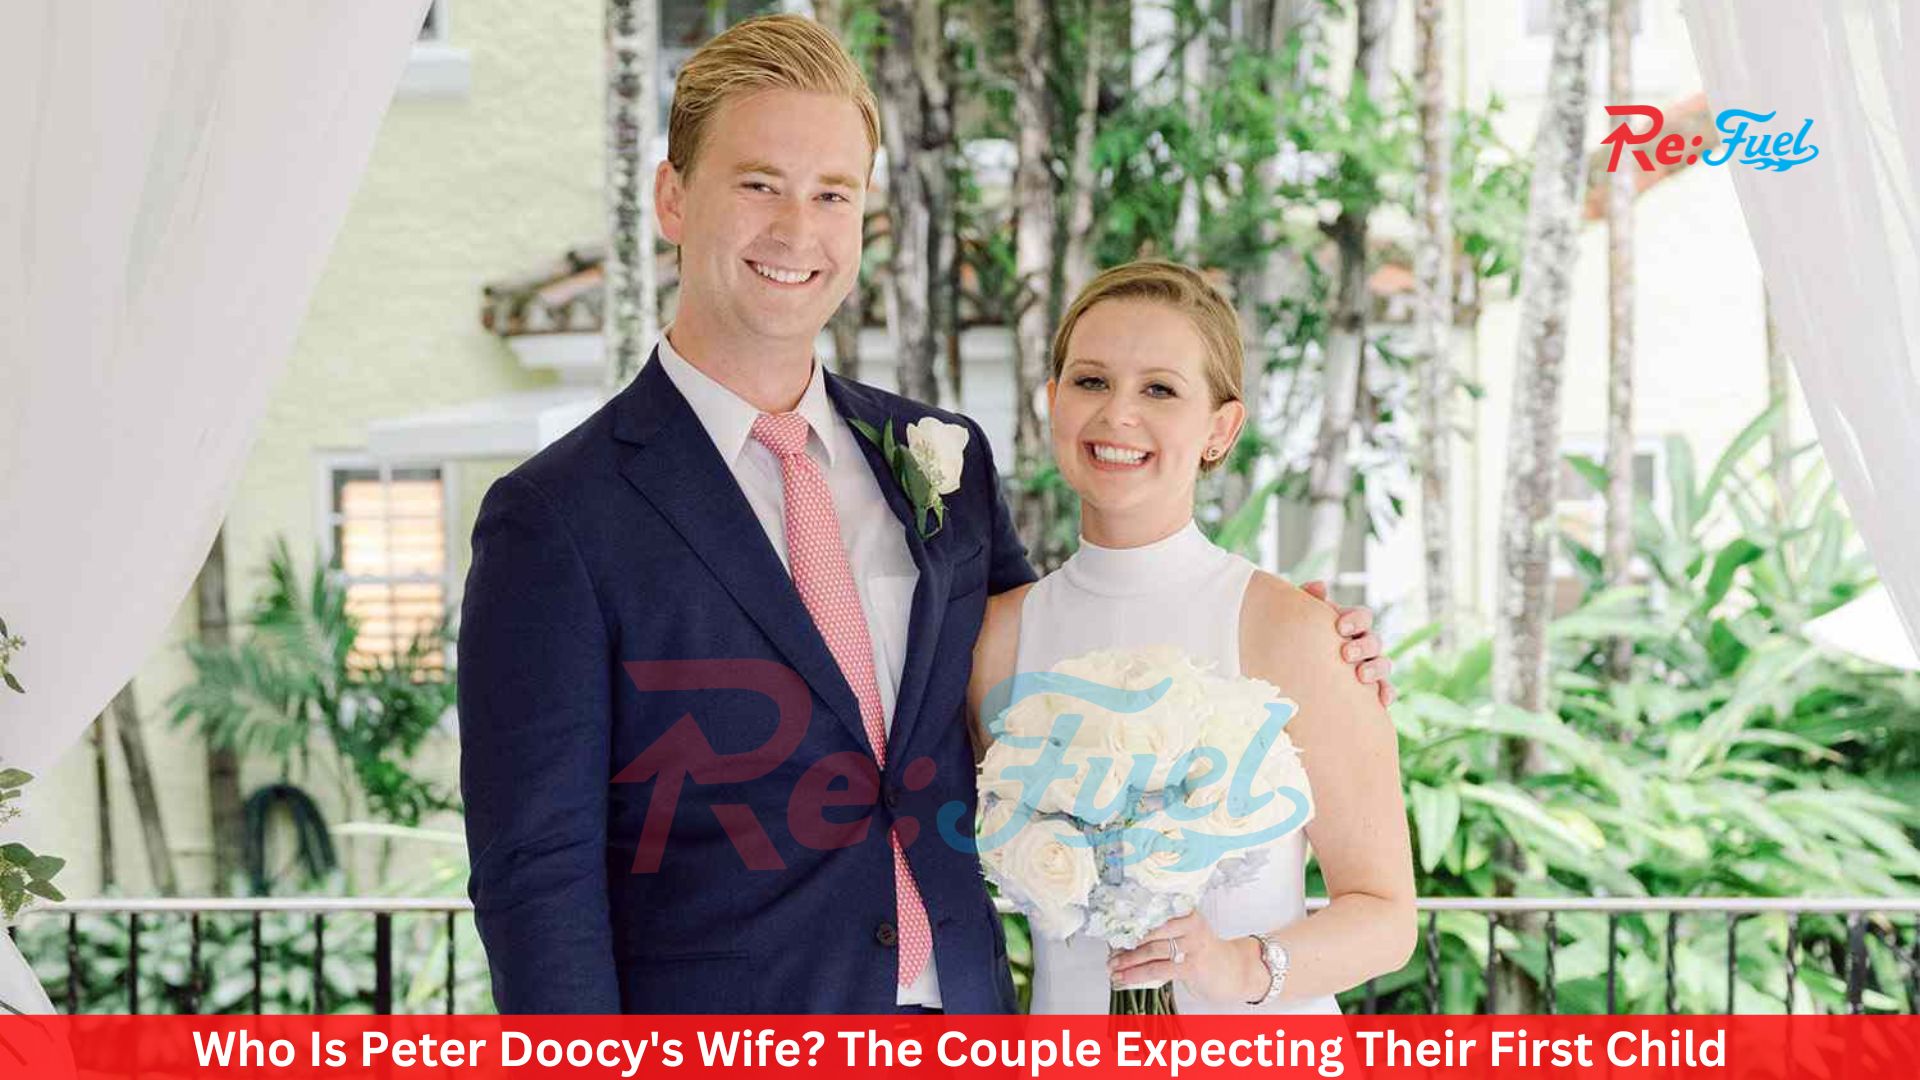 Who Is Peter Doocy's Wife? The Couple Expecting Their First Child